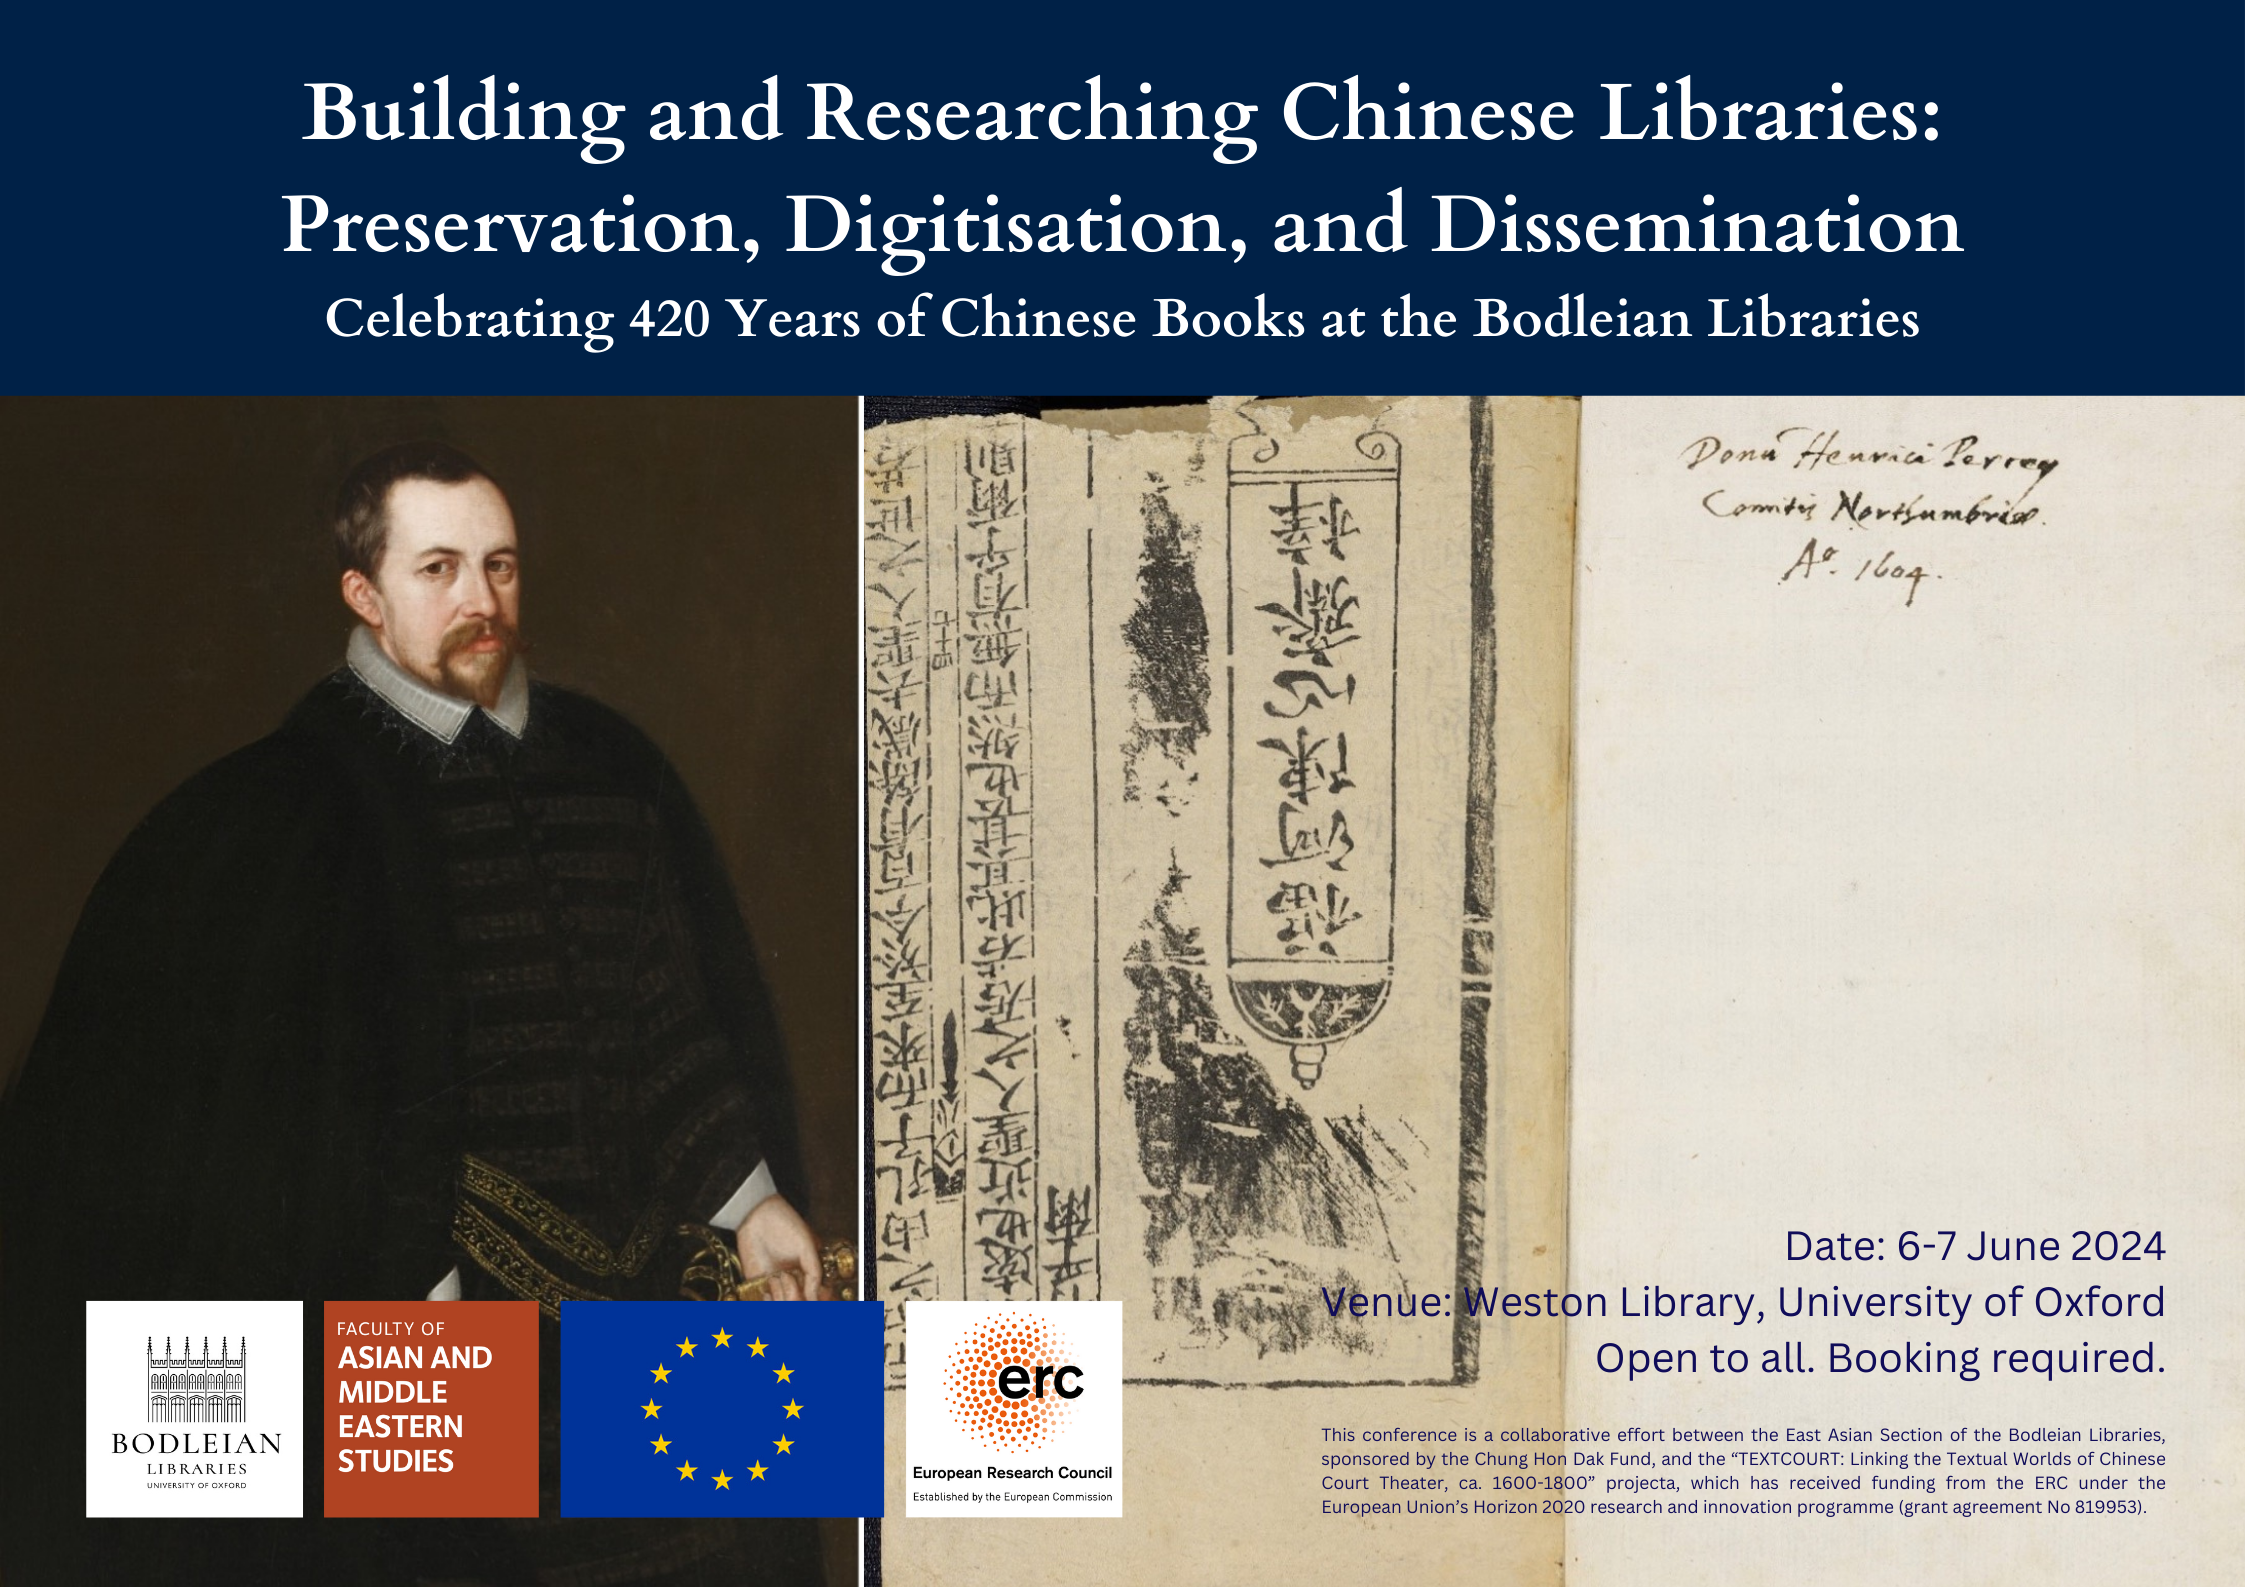 Building and Researching Chinese Libraries: Preservation, Digitisation, and Dissemination